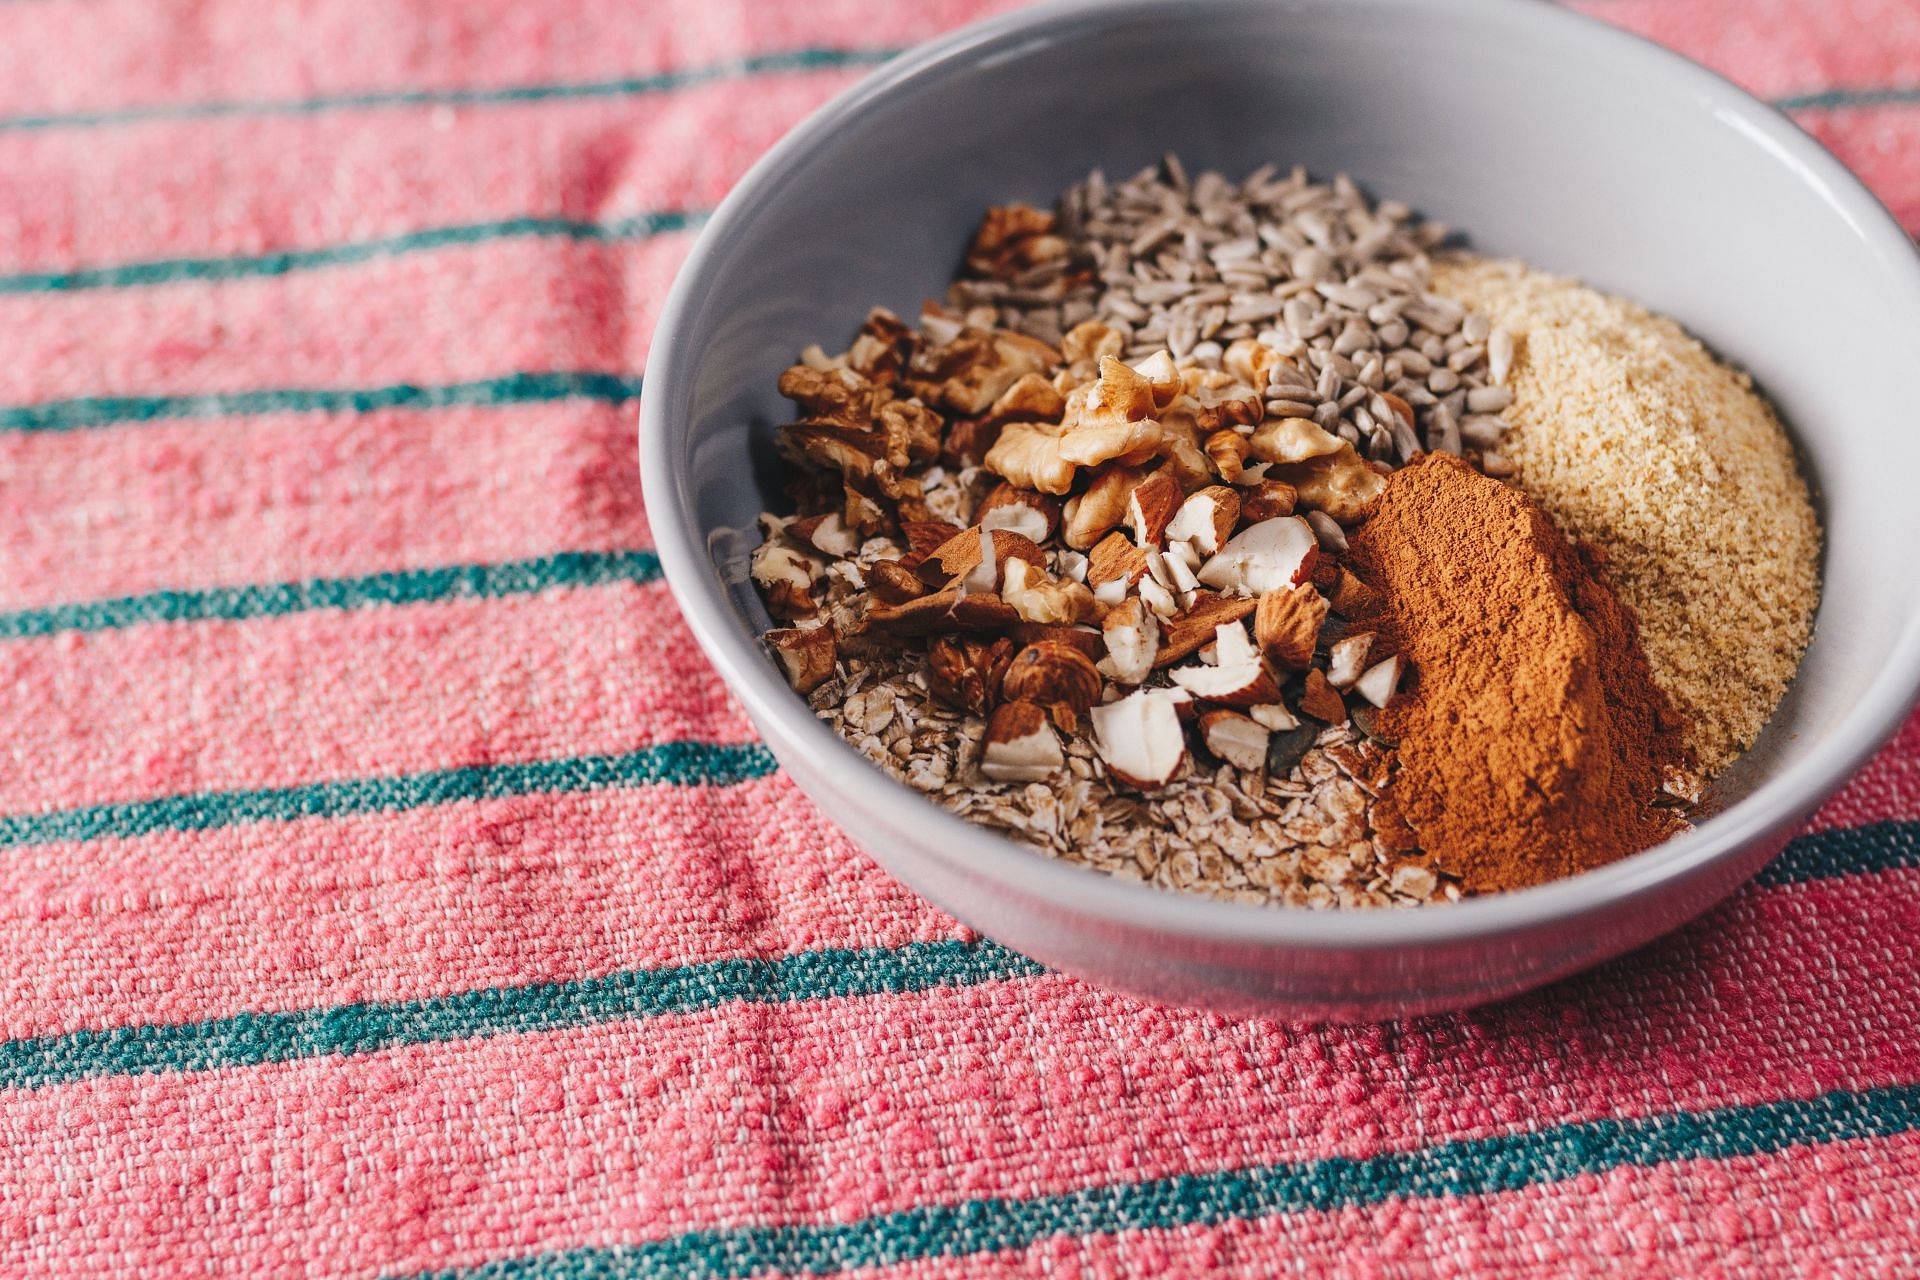 Antioxidants-enriched bowl of seeds and nuts (Image via Pexels)